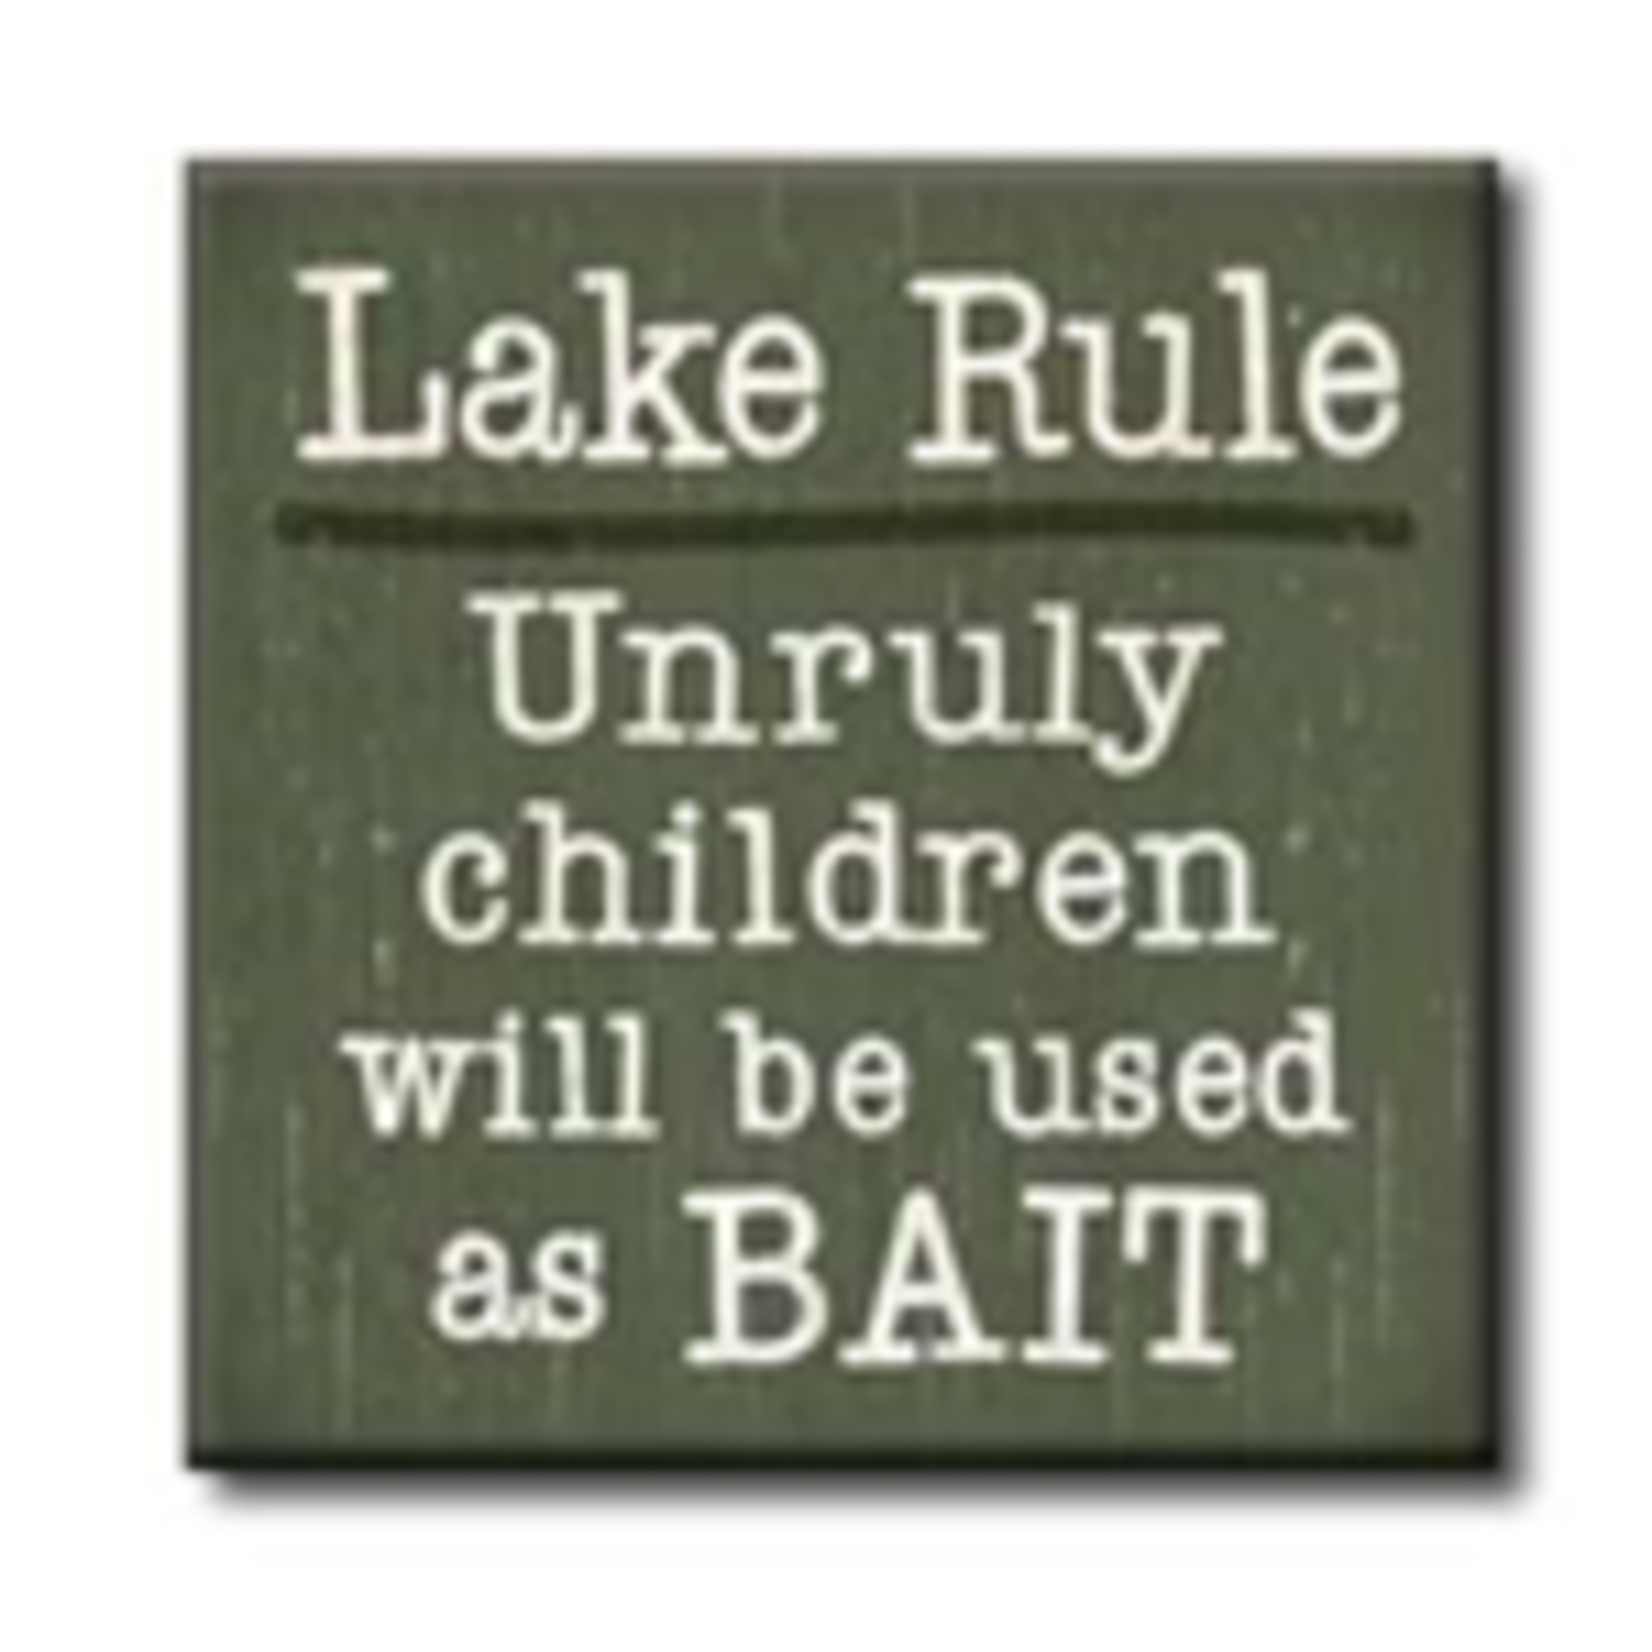 Lake Rule - Unruly Childer Used as Bait 4x4